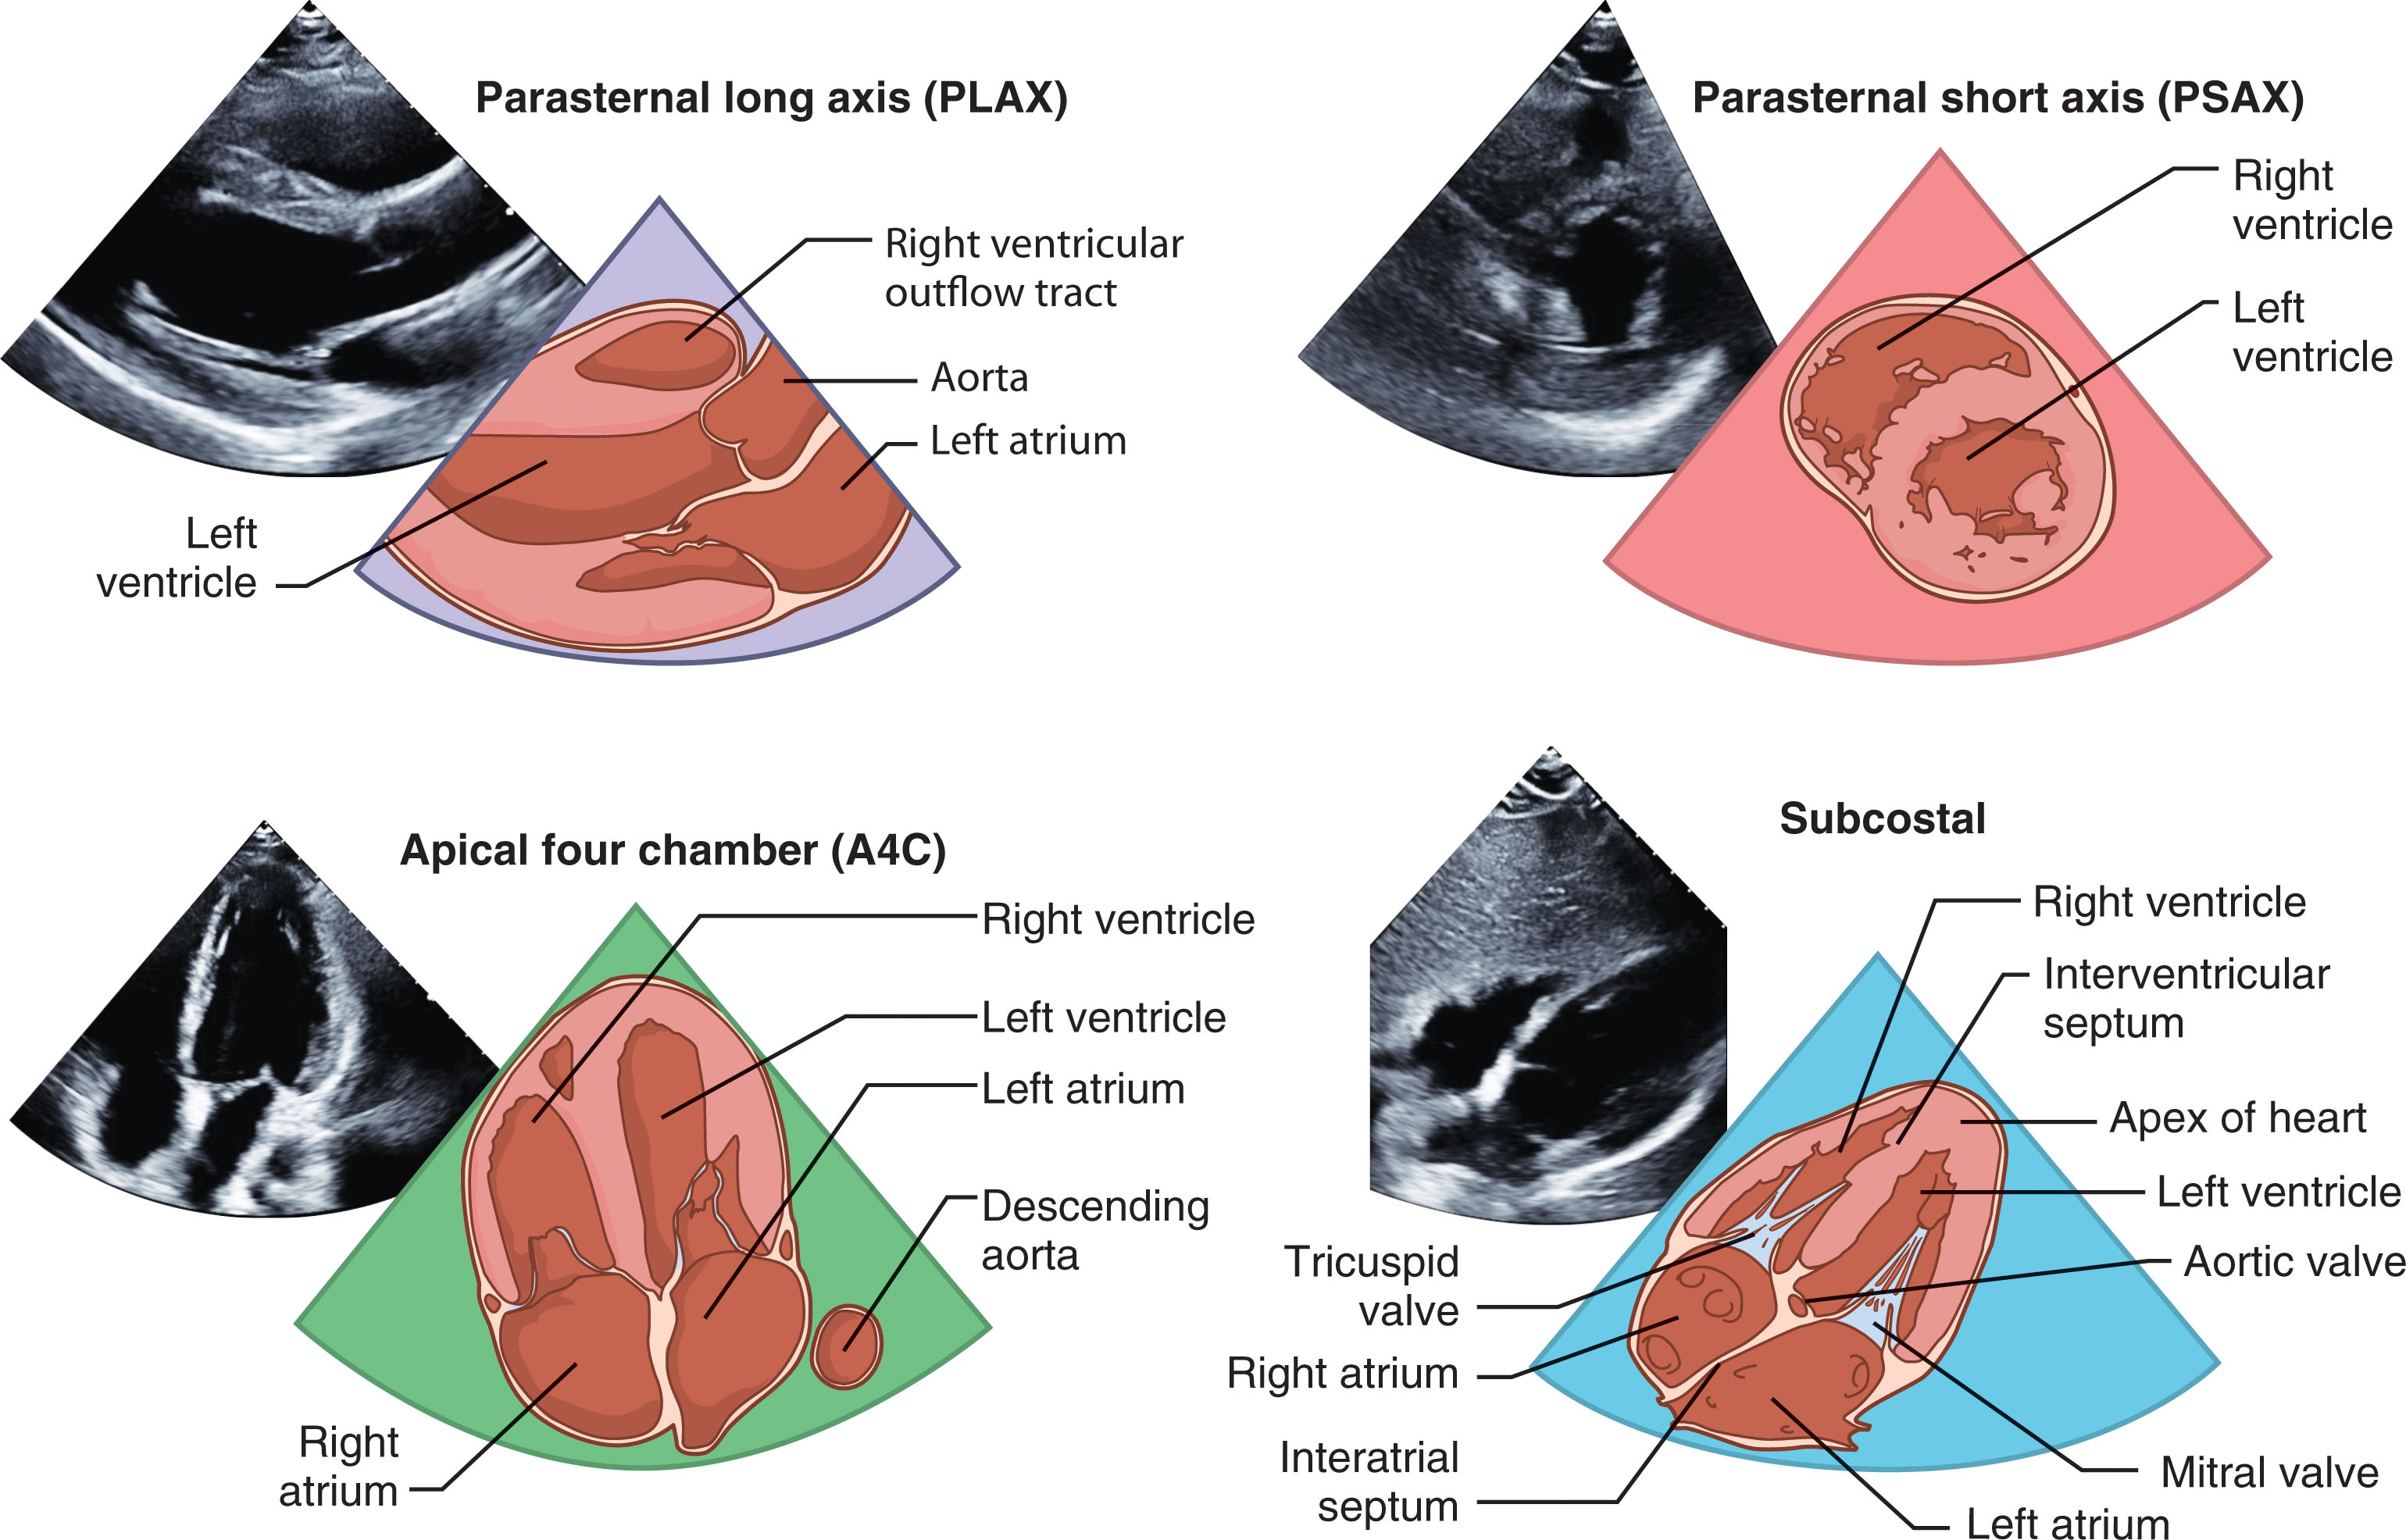 Fig. 32.4, (A) The heart is examined from the parasternal long and short axis, the apical, subcostal, and suprasternal notch. (B) The four transducer positions for the echocardiogram: Suprasternal, transducer is placed in the suprasternal notch; subcostal, transducer is placed near the midline and beneath the costal margin; apical, transducer is placed at the point of maximal impulse cardiac apex; and parasternal, transducer is placed just left of the sternum about the fourth intercostal space.